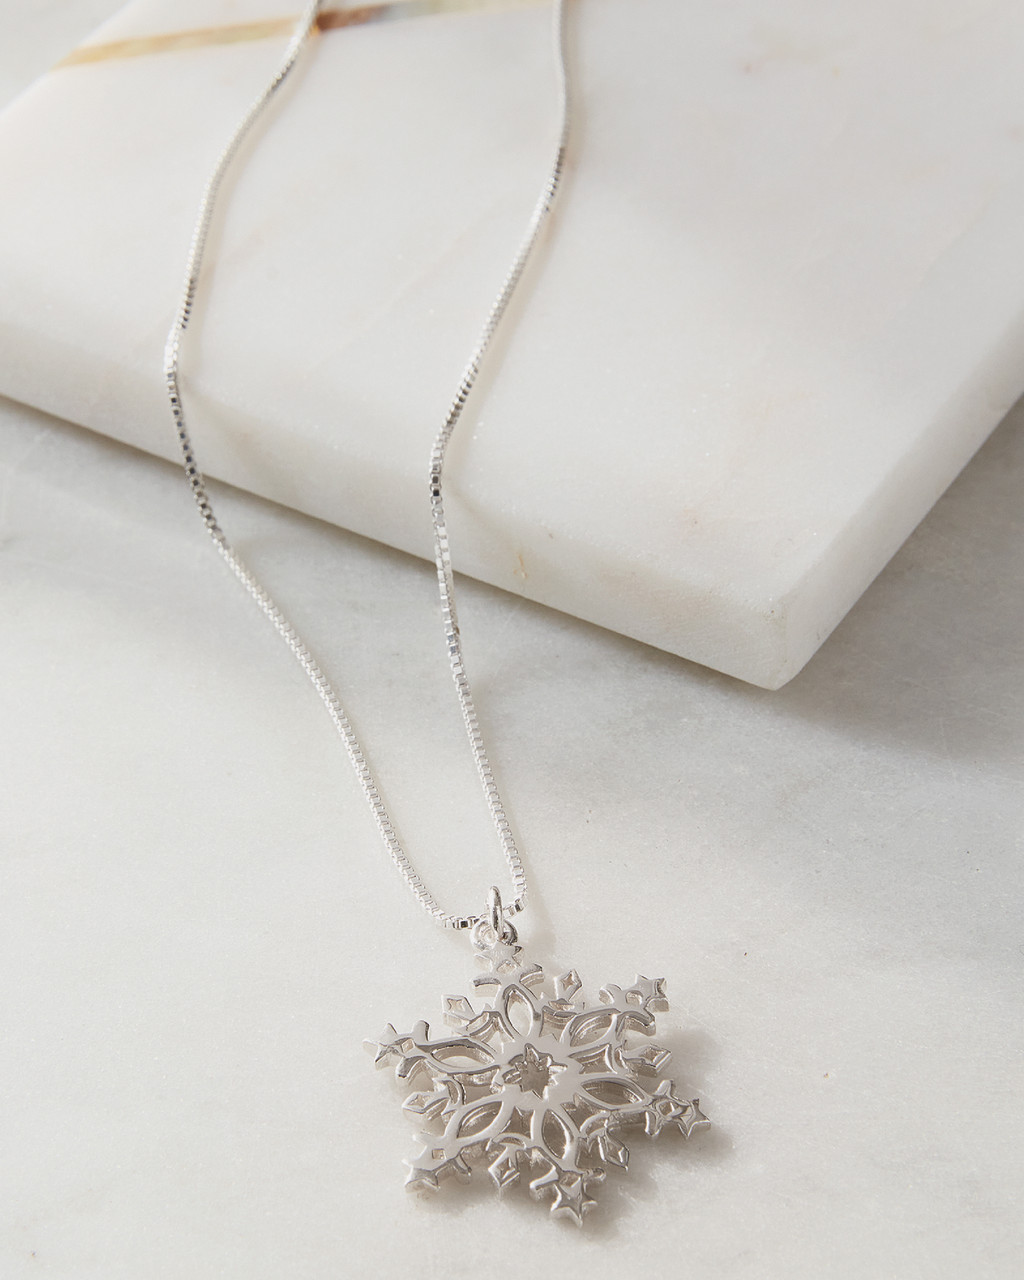 Buy Grandma Necklace Snowflake Necklace Silver Snowflake Necklace Snowflake  Jewelry Mothers Day Gifts Online in India - Etsy